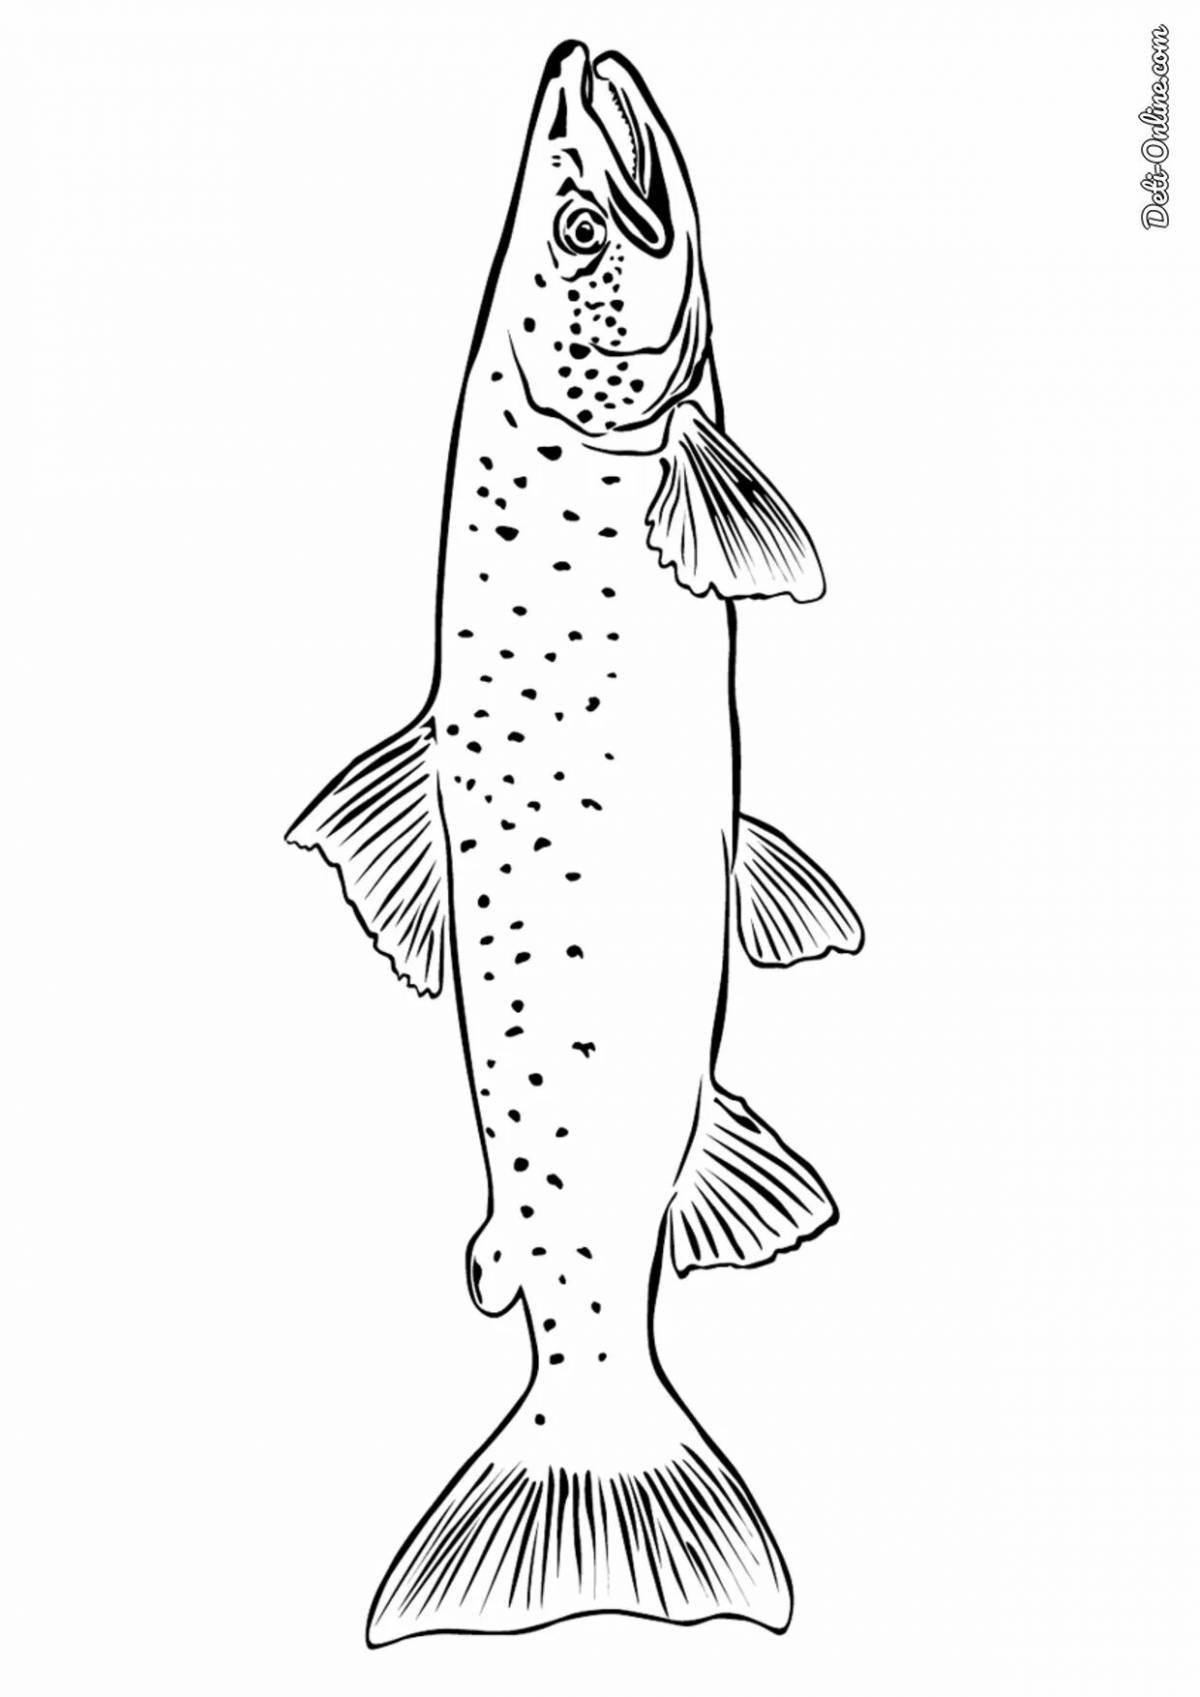 Great salmon coloring book